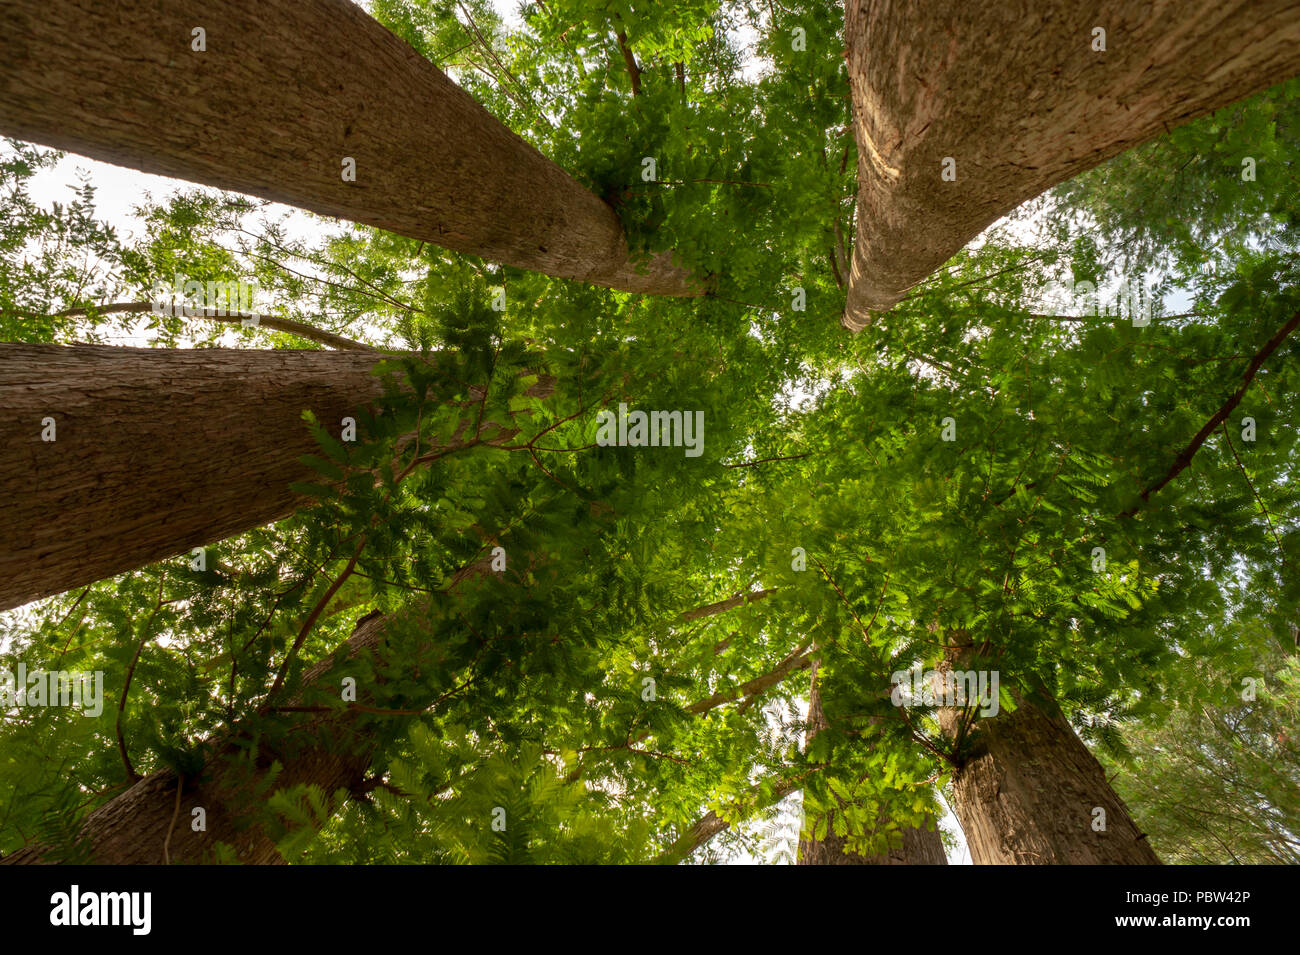 Looking up into the branch structure of a multi-stem Dawn Redwood tree (Metasequoia glyptostroboides). Arnold Arboretum, Boston, Massachusetts, USA Stock Photo